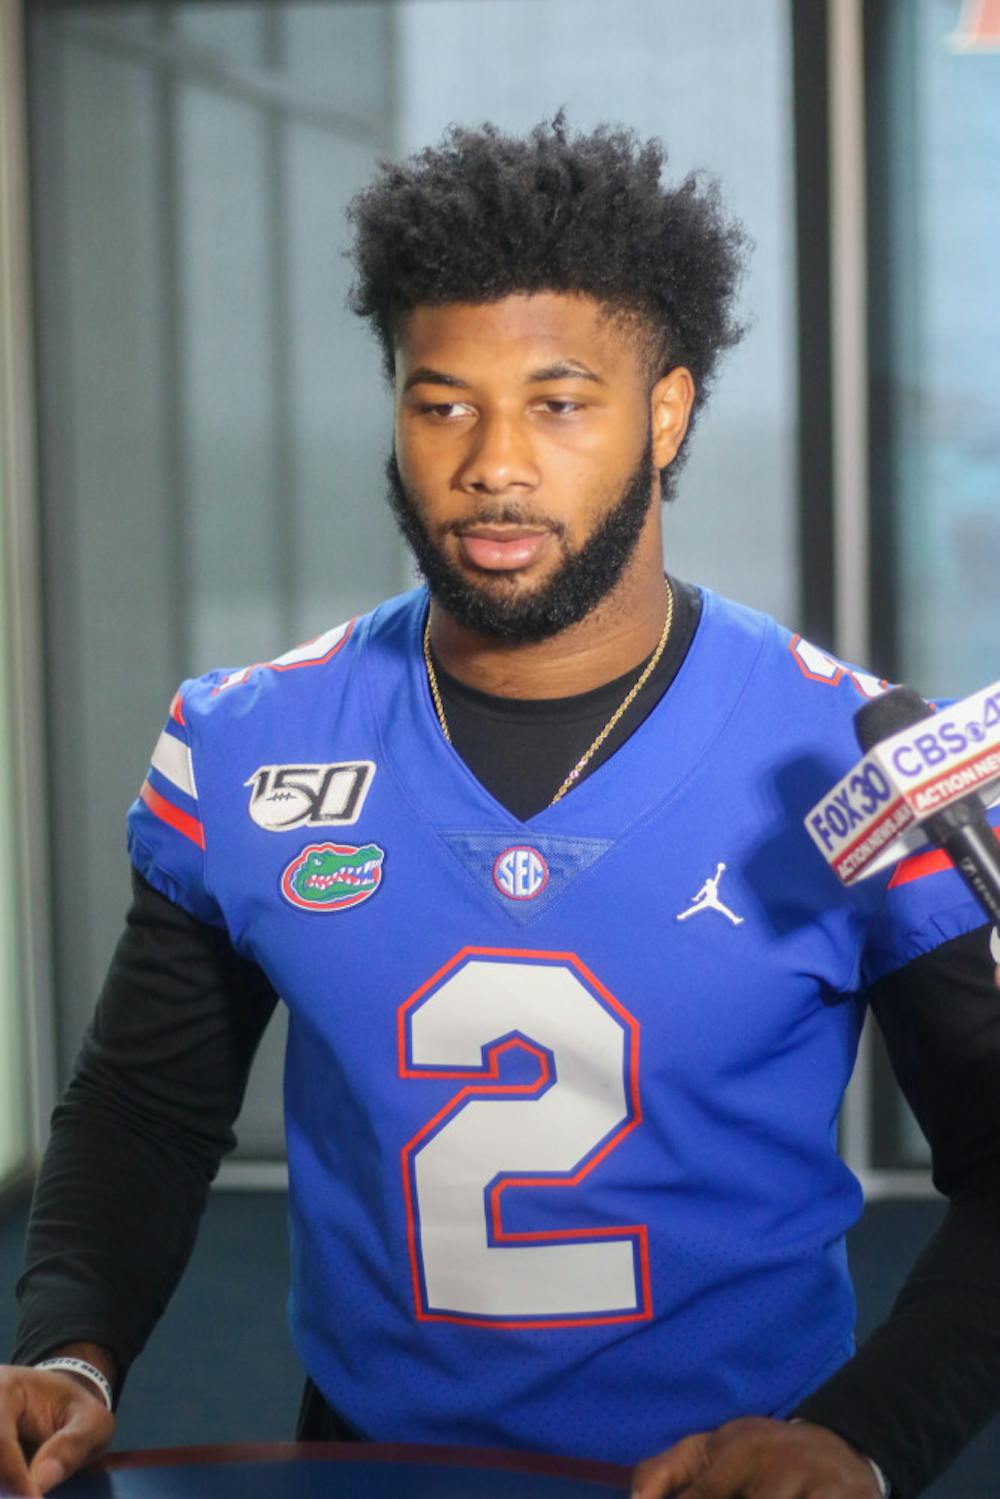 <p><span id="docs-internal-guid-2346873c-7fff-5eed-edfd-5b0dd9ec46e9"><span>Florida running back Lamical Perine said that the Gators are “for sure” a College Football Playoff team at UF’s media day on Thursday. Perine rushed for 826 yards and seven touchdowns last season as UF won 10 games and a New Year’s Six bowl.</span></span></p>